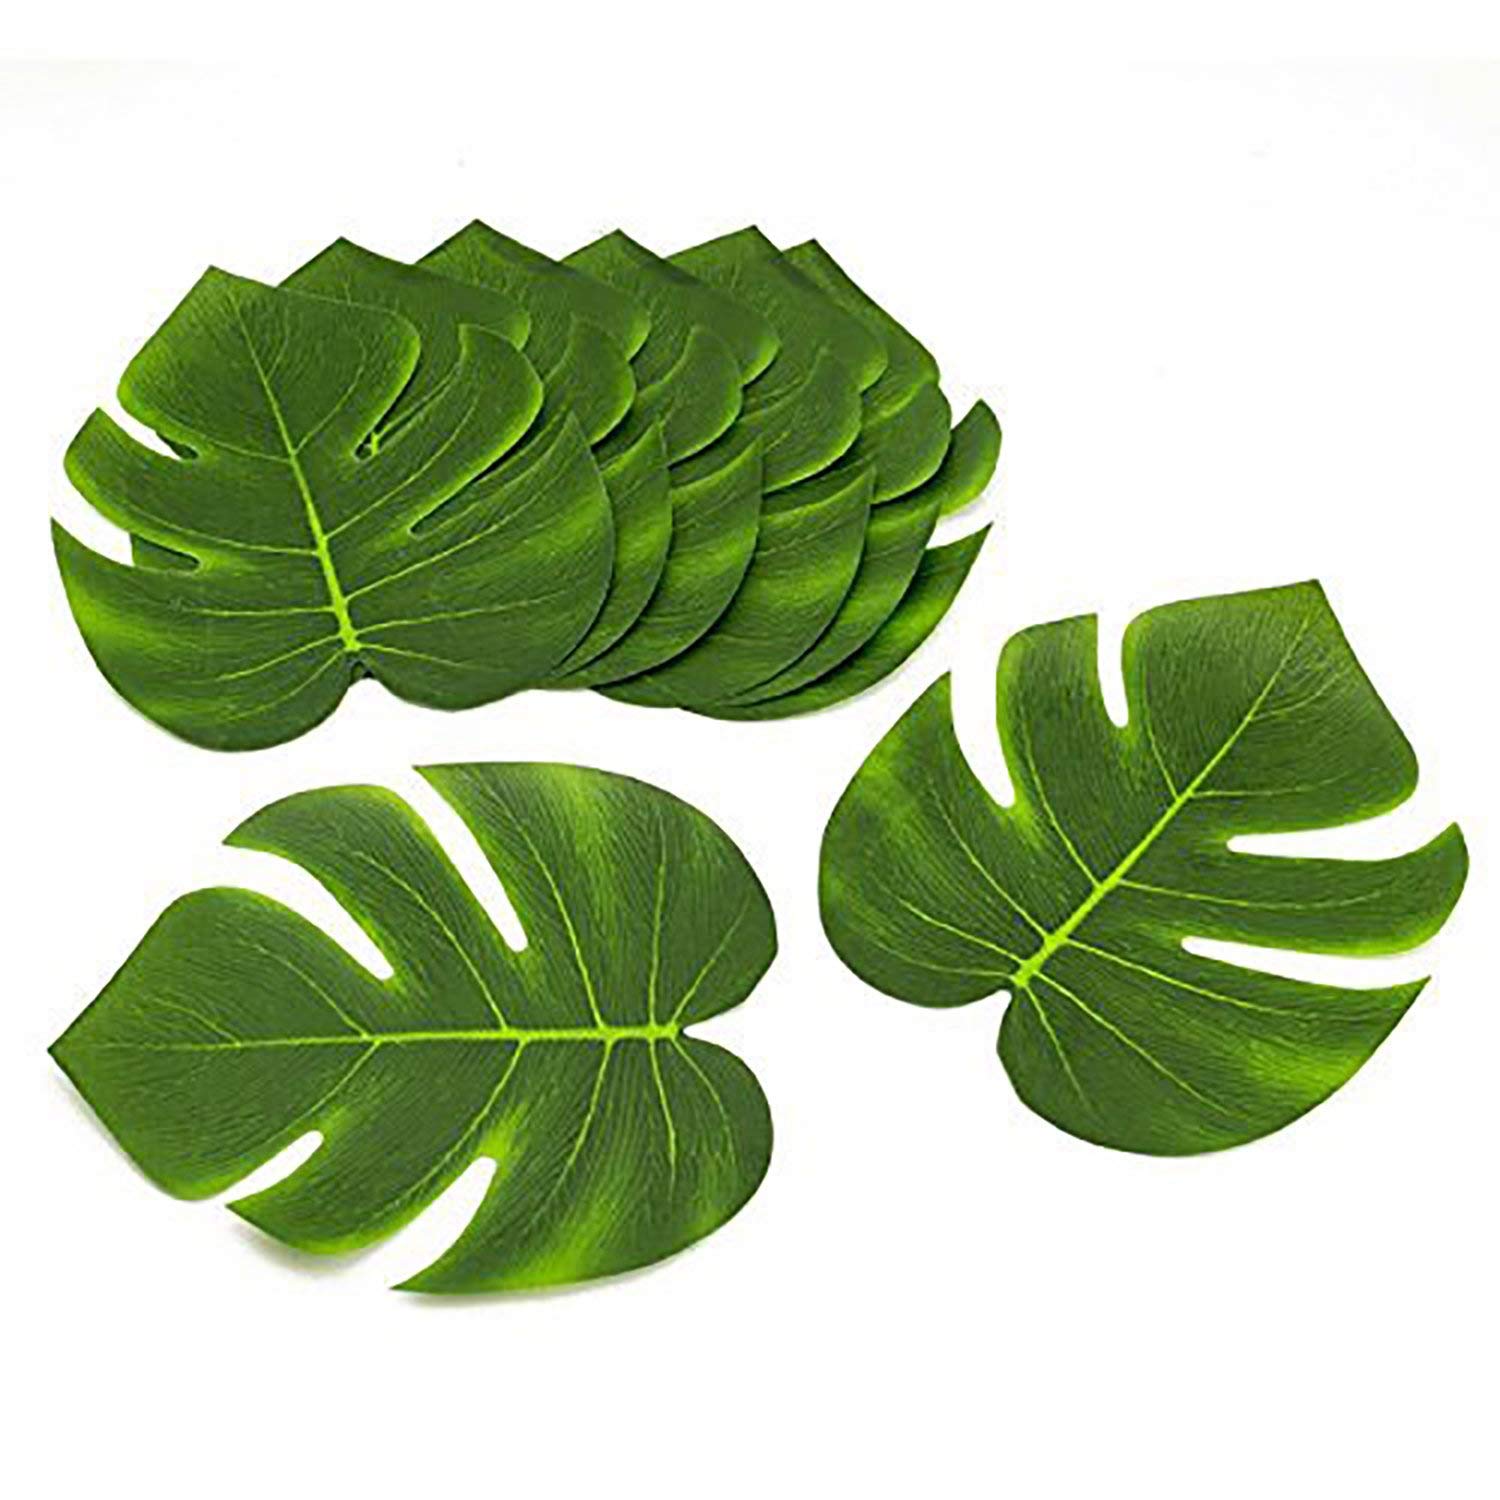 Amazon.com: Tytroy Coated Fabric Artificial Tropical Green Plant ...